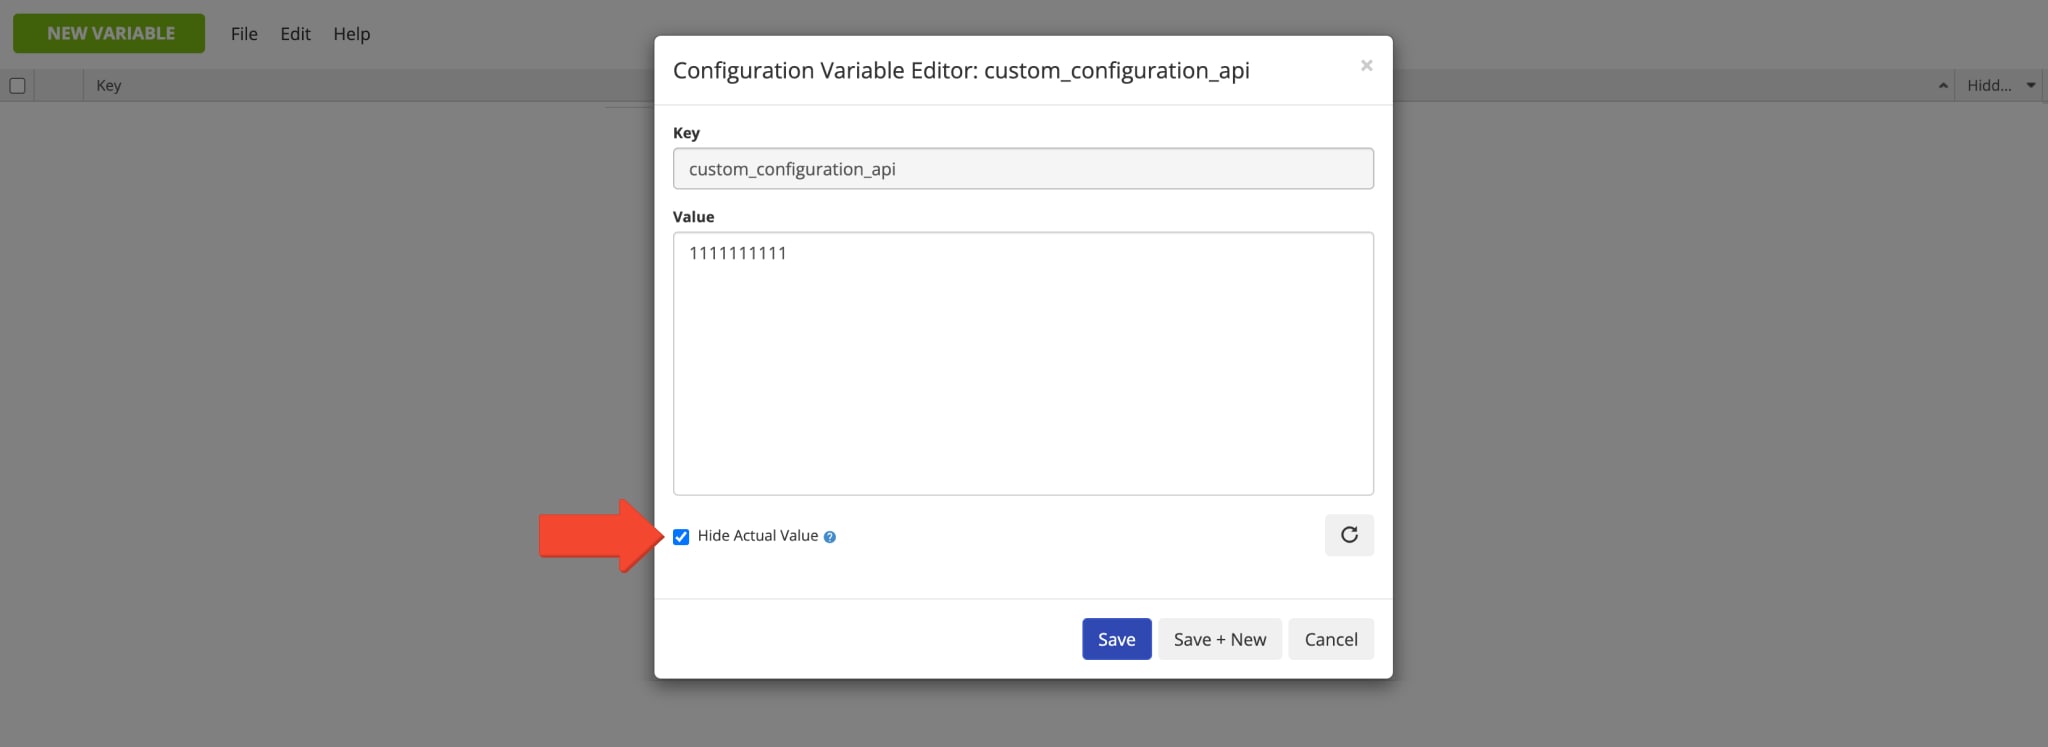 Hide advanced configuration values for account customizations, API, and other route optimization account features.